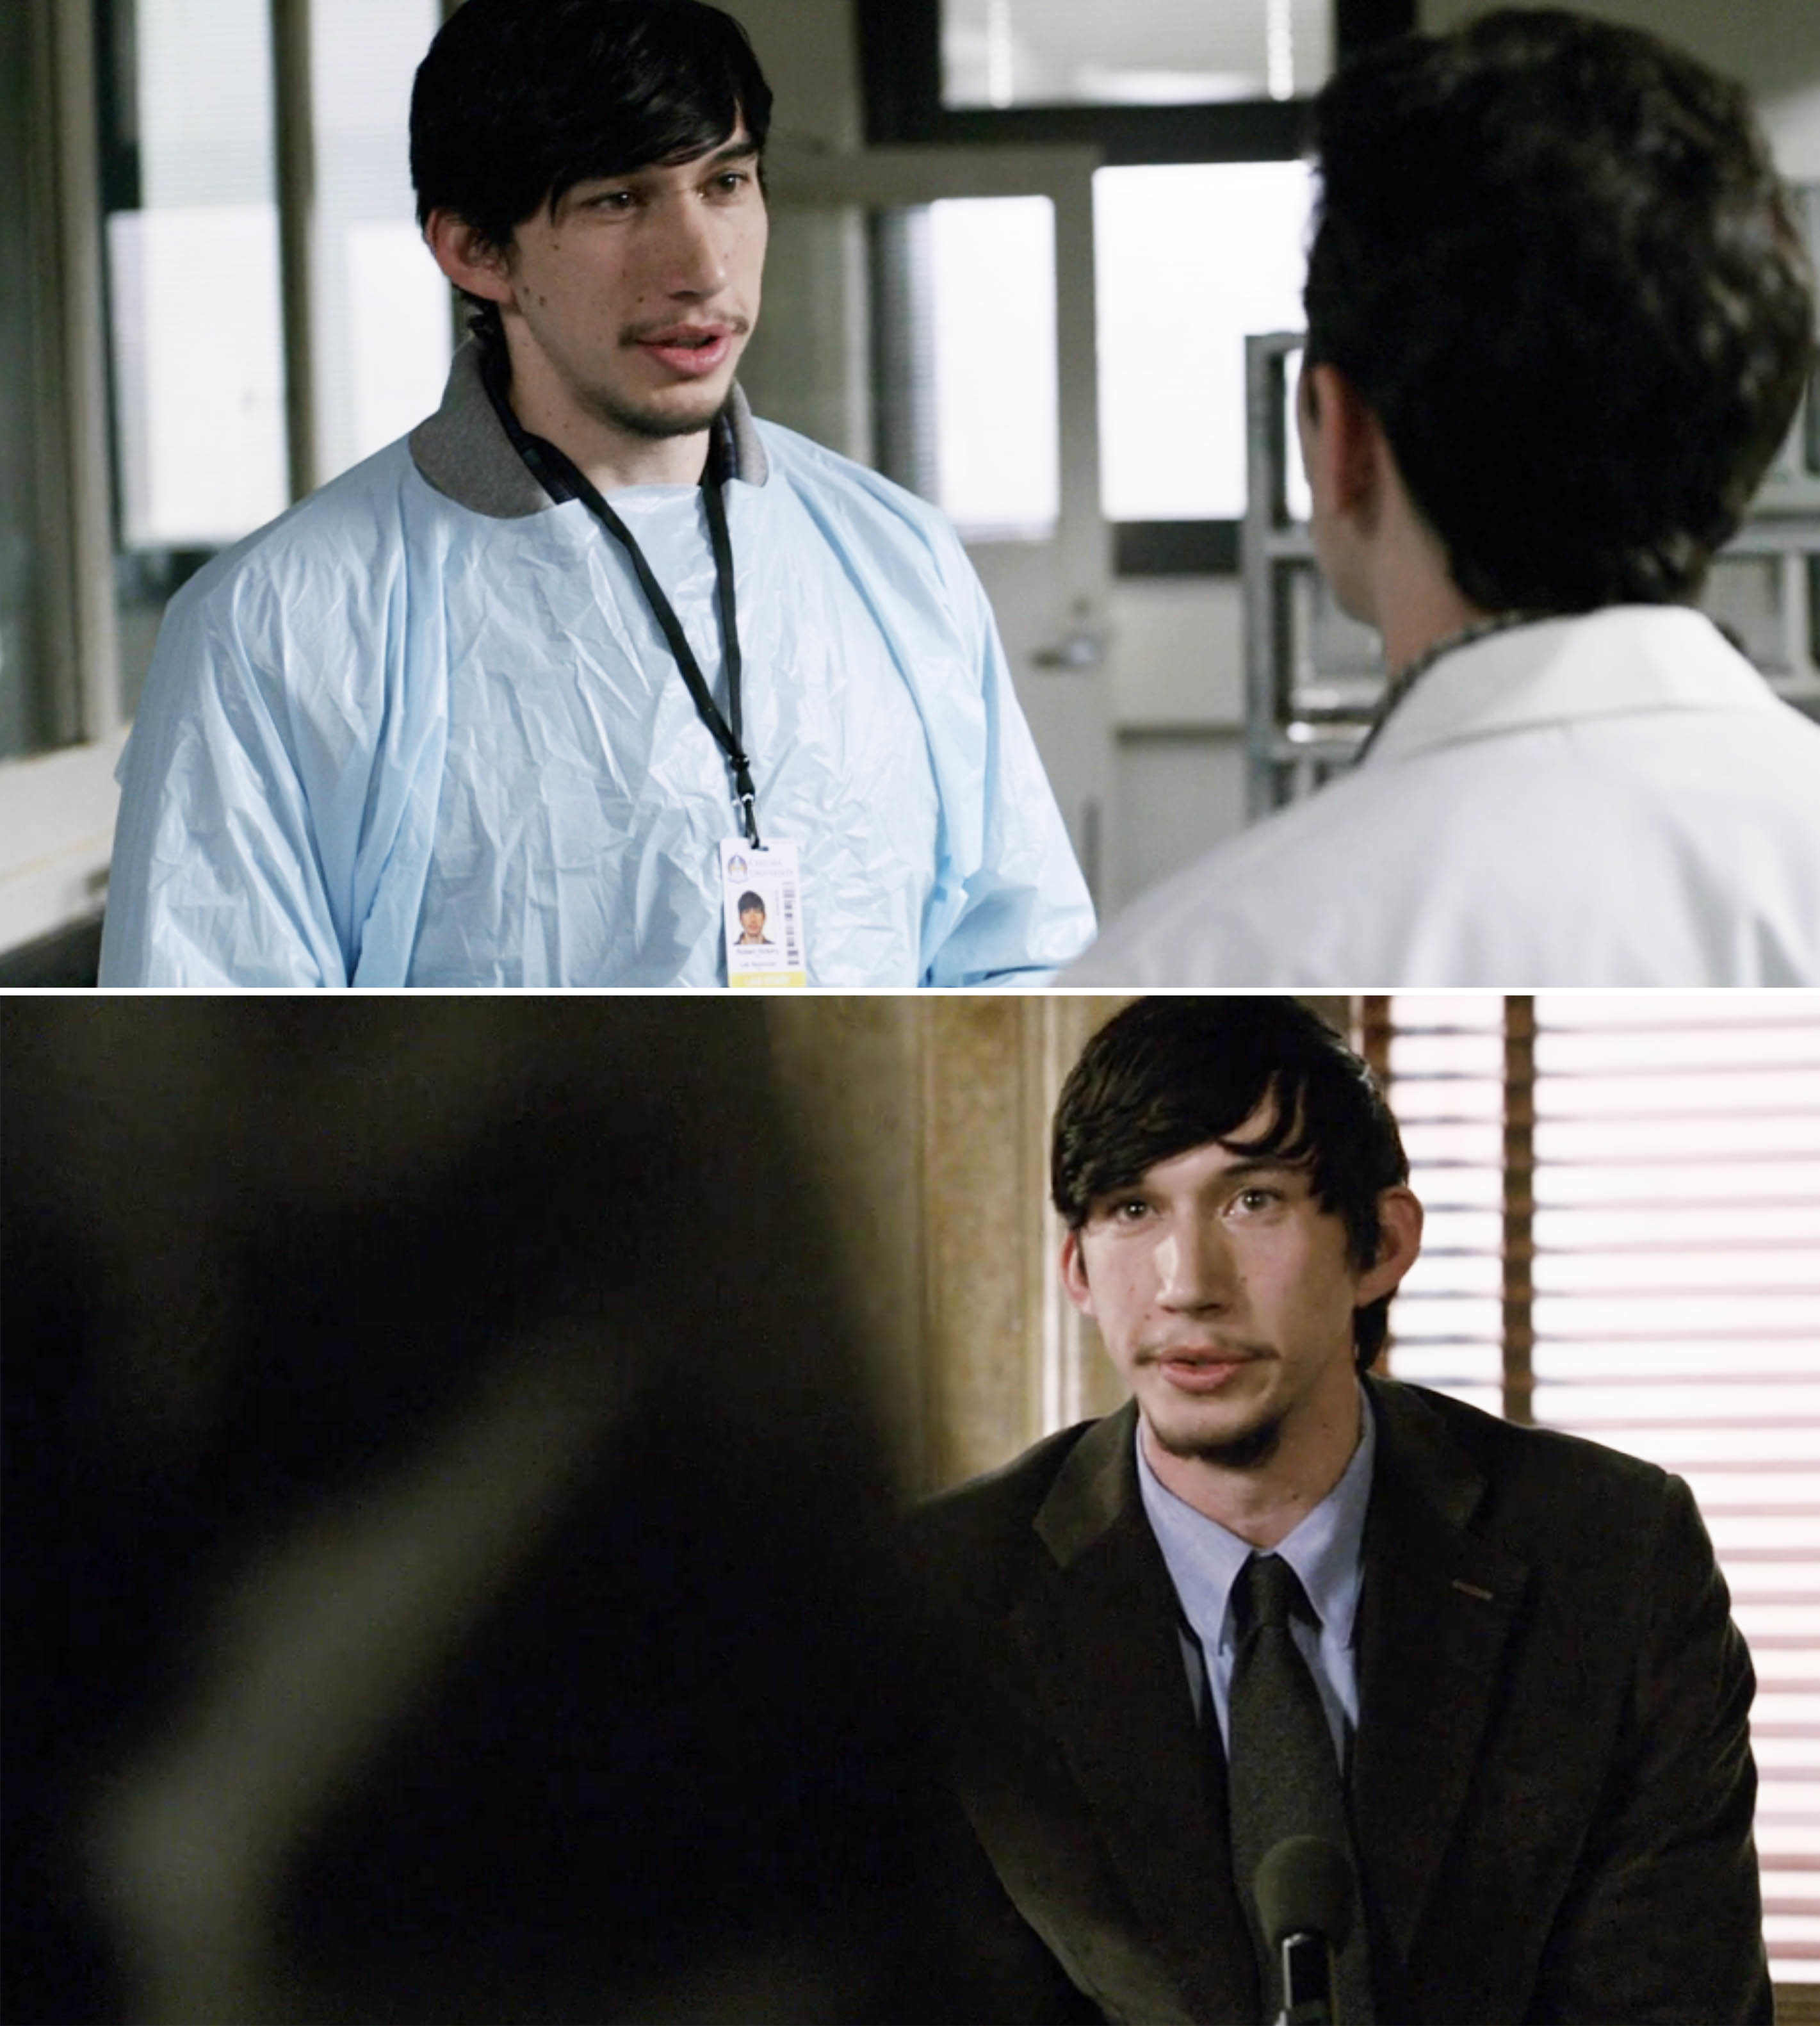 Adam Driver on Law and order